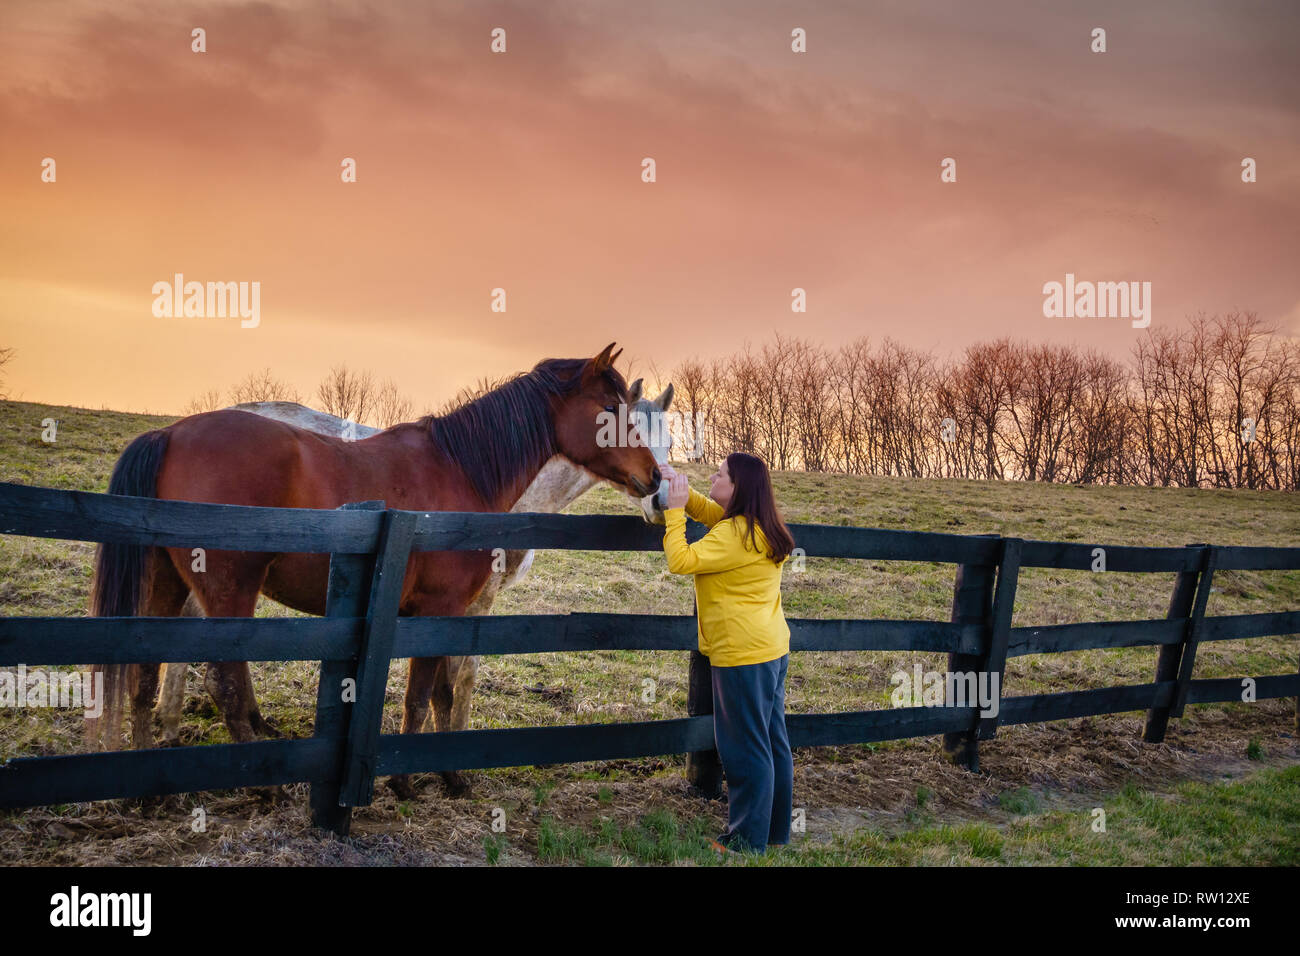 Young woman is petting horses on a farm in Kentucky at sunset Stock Photo